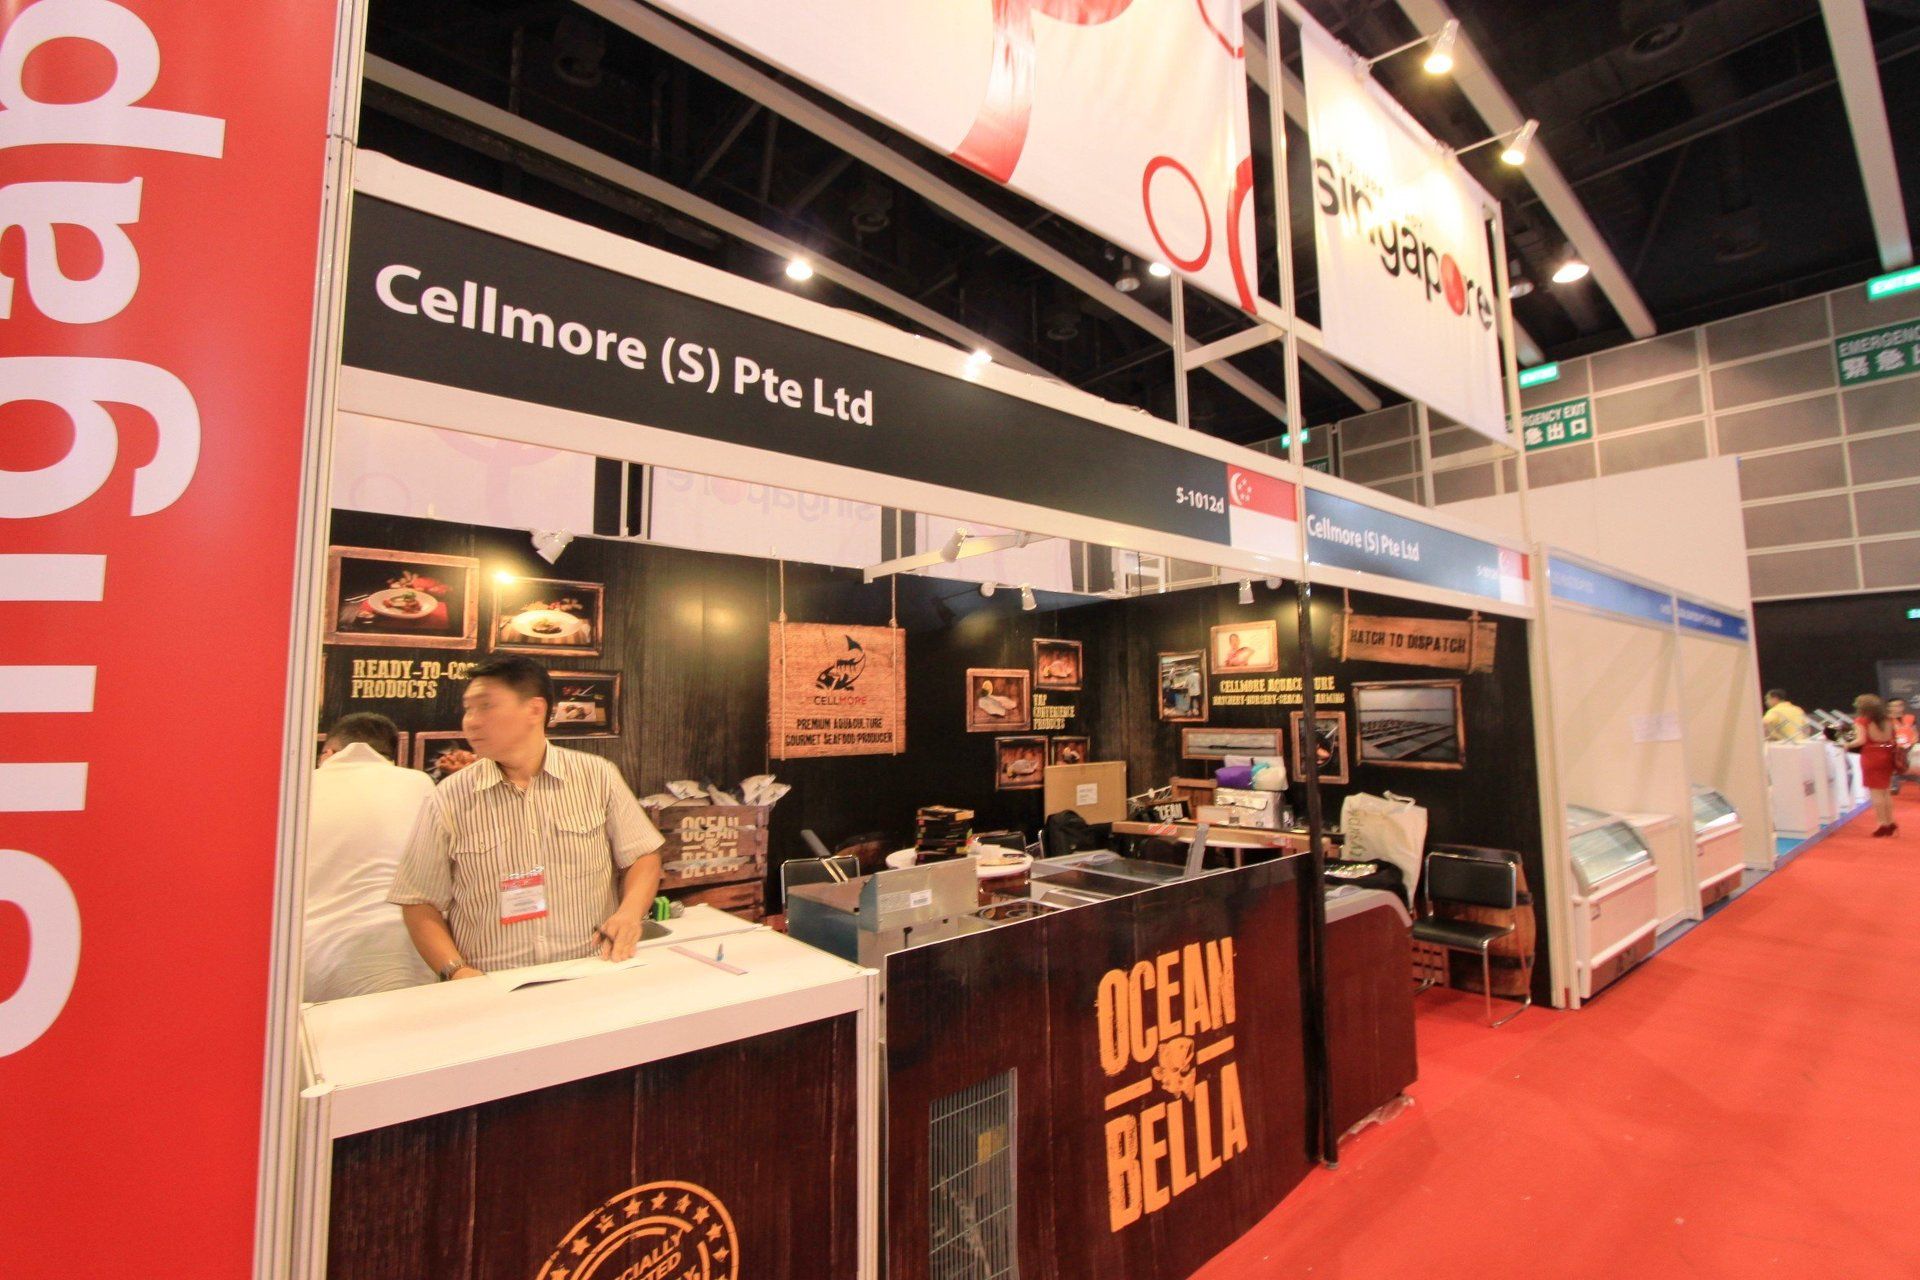 Singapore Pavilion @ Seafood Expo Asia 2013. Booth designed and built by Essential Global Fairs.